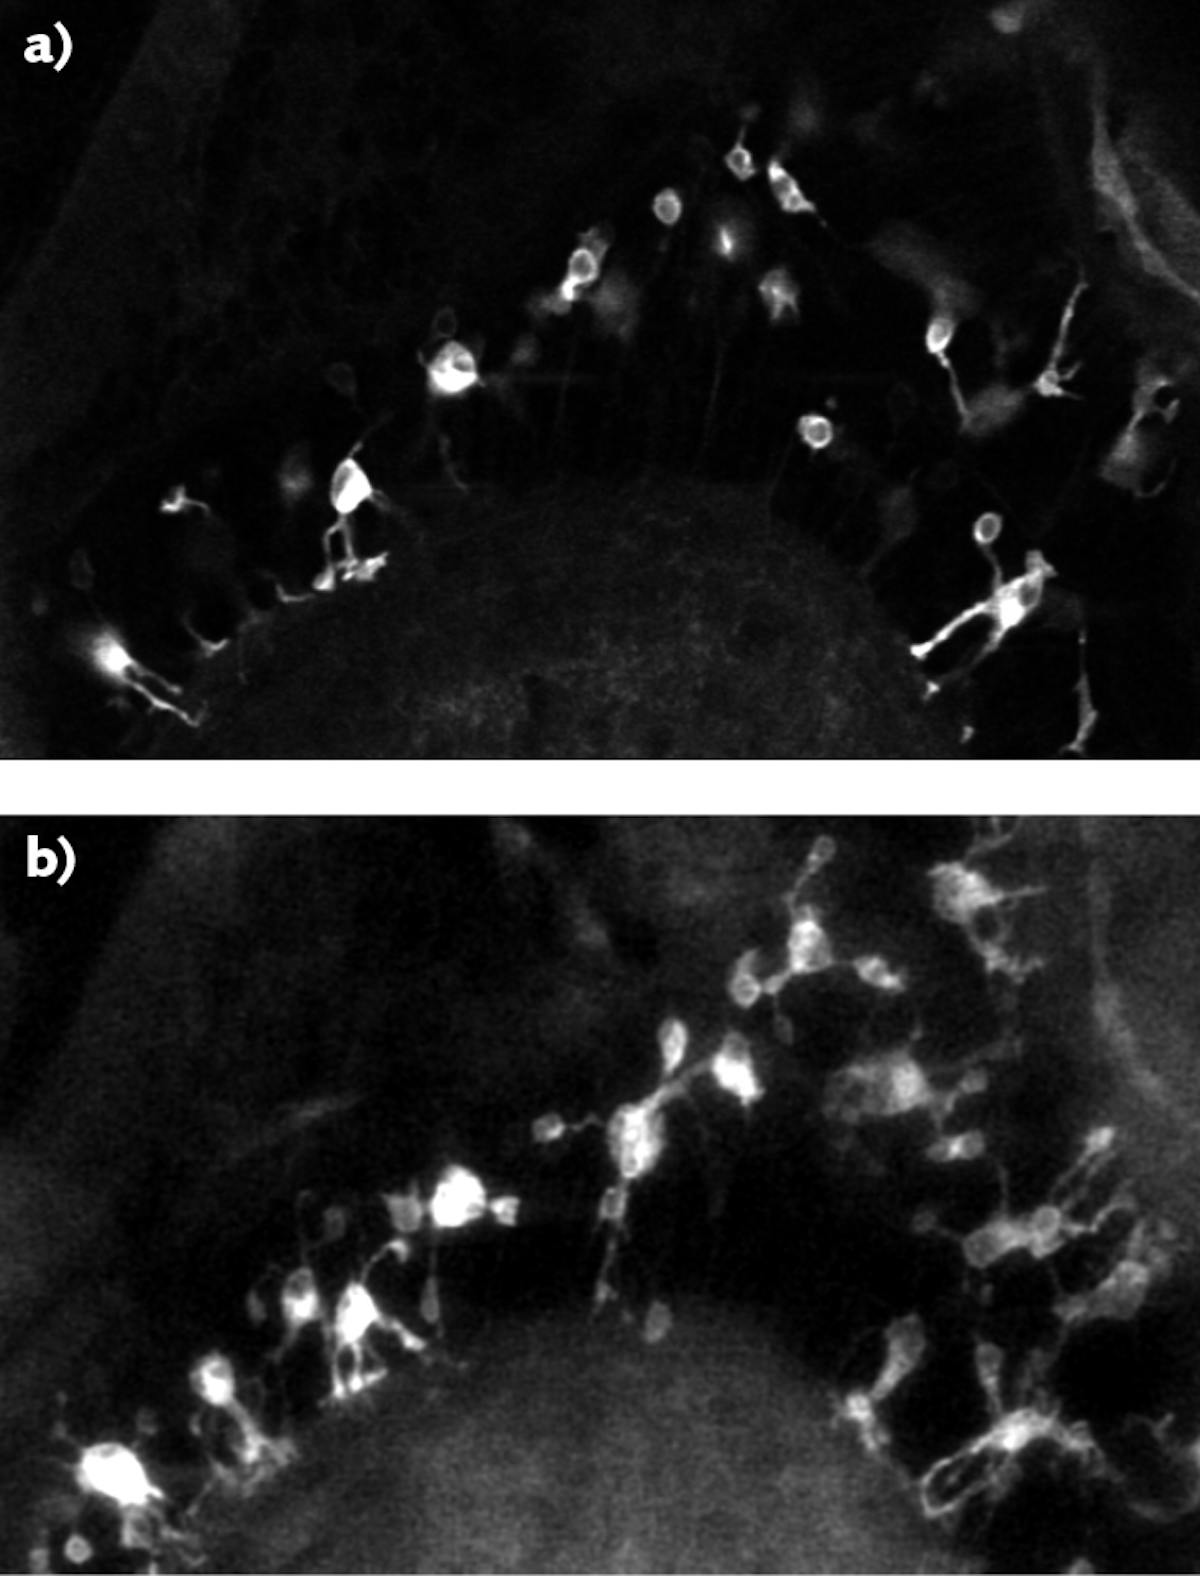 In vivo single-plane images of green fluorescent protein (GFP)-labeled microglial cells in zebrafish are dramatically improved when imaged with a multiphoton video-rate microscopy (VMS) system from Bliq Photonics without (a) and with (b) an axicon module that incorporates a Spark Laser Alcor fiber laser at 920 nm. For the same scanning time, the axicon module expands imaging depth of field and improves contrast. Scale bar is 20 &micro;m.